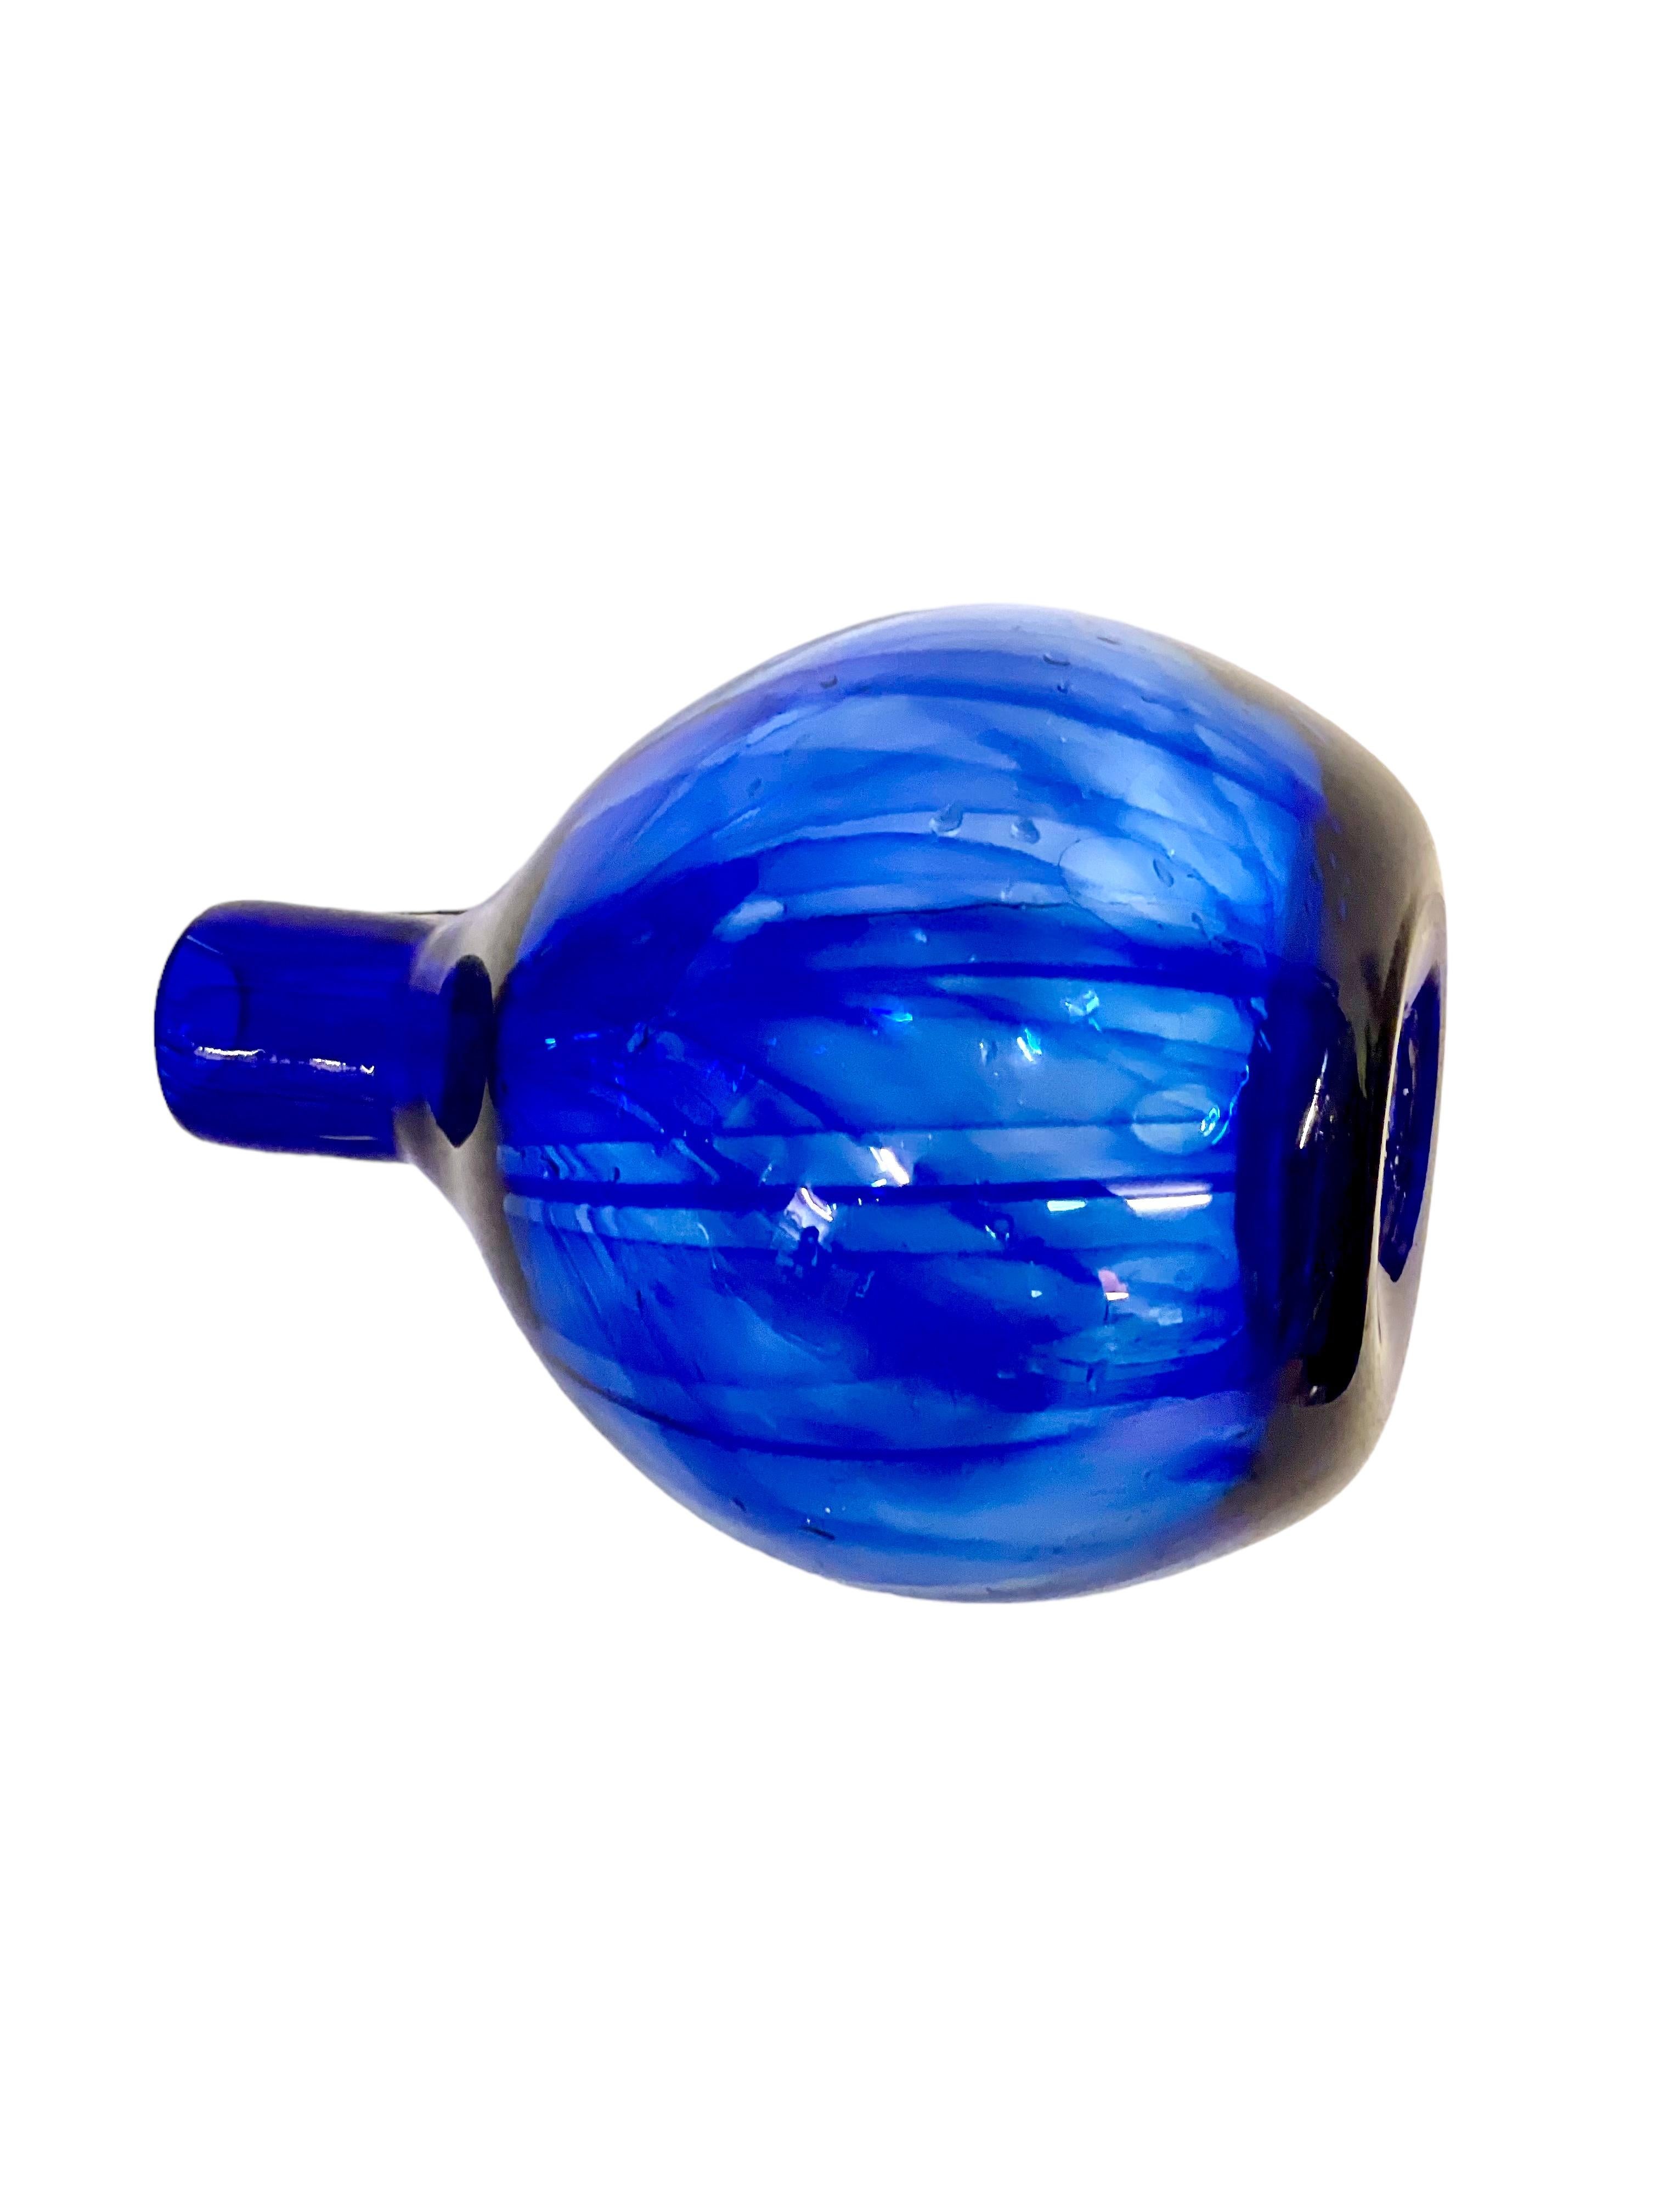 French Blue Blown Glass Vase by Jean Claude Novaro For Sale